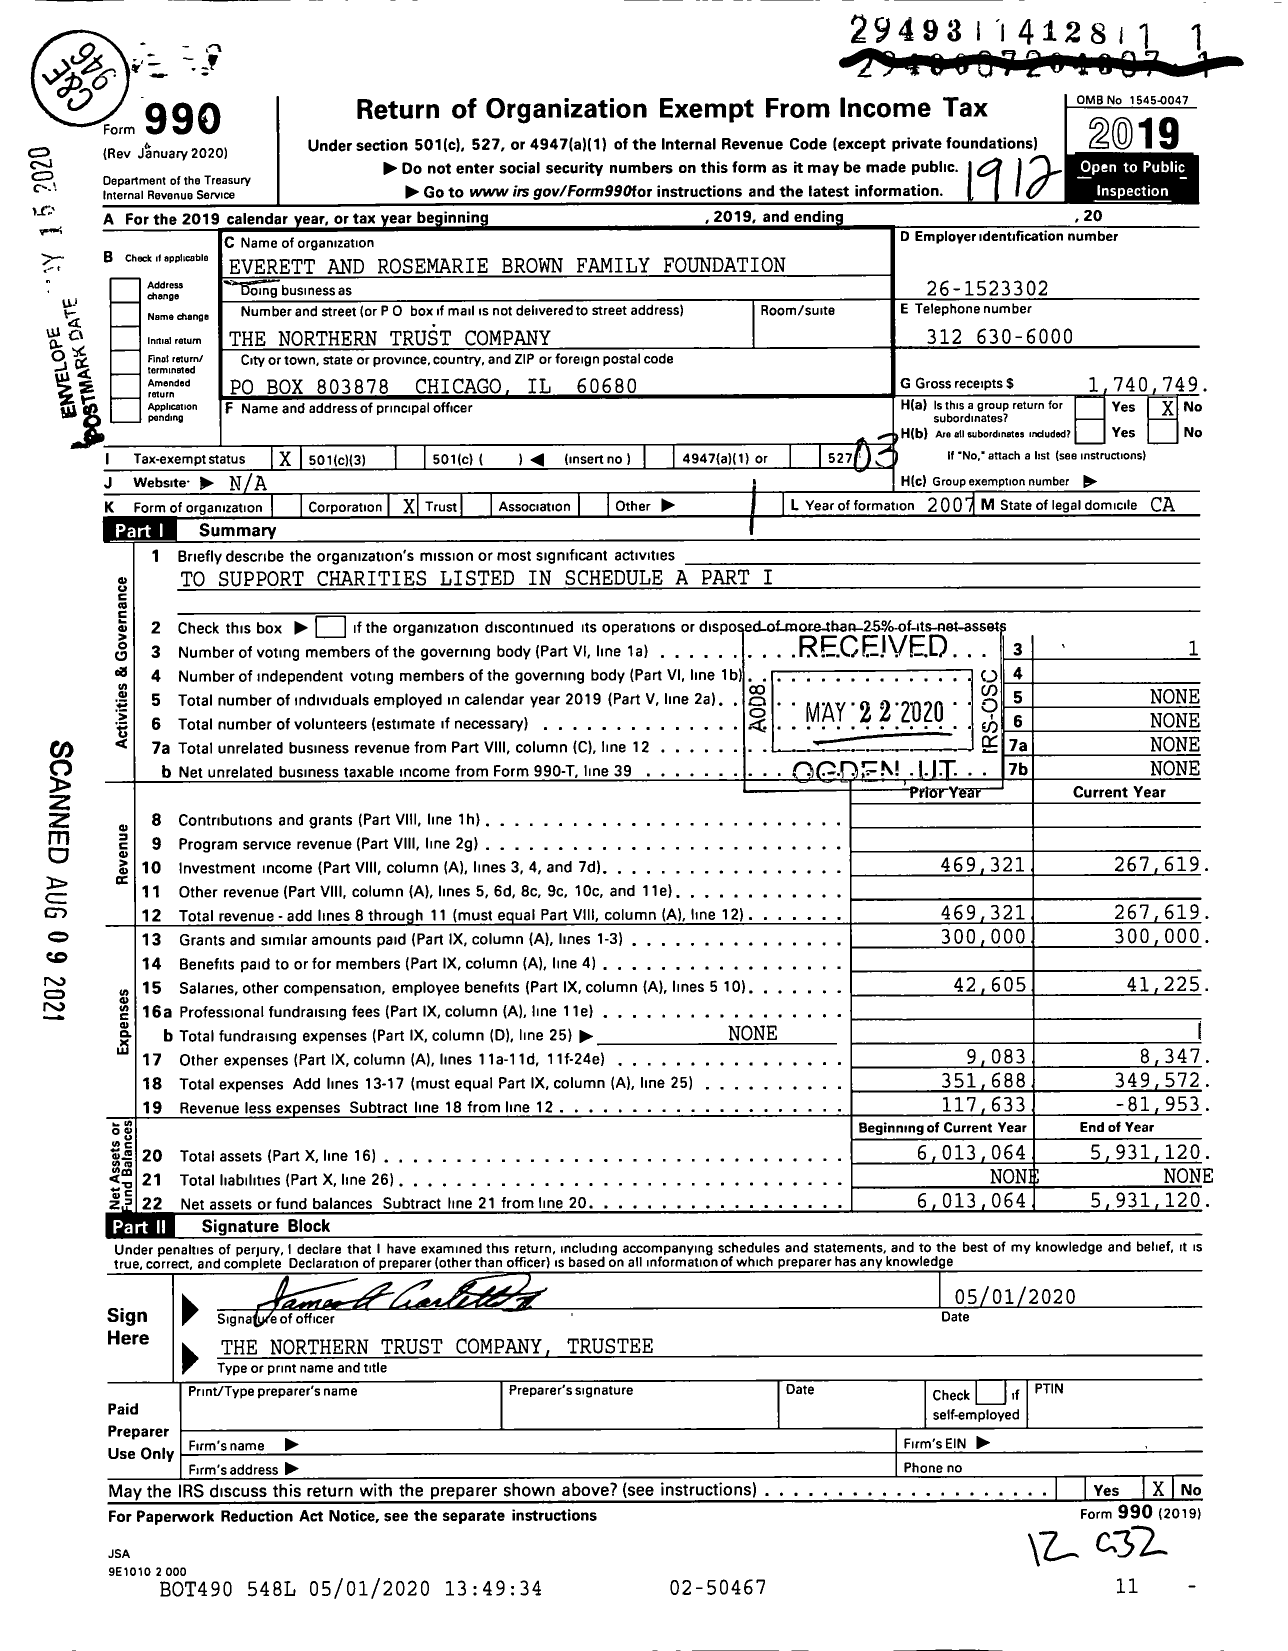 Image of first page of 2019 Form 990 for Everett and Rosemarie Brown Family Foundation